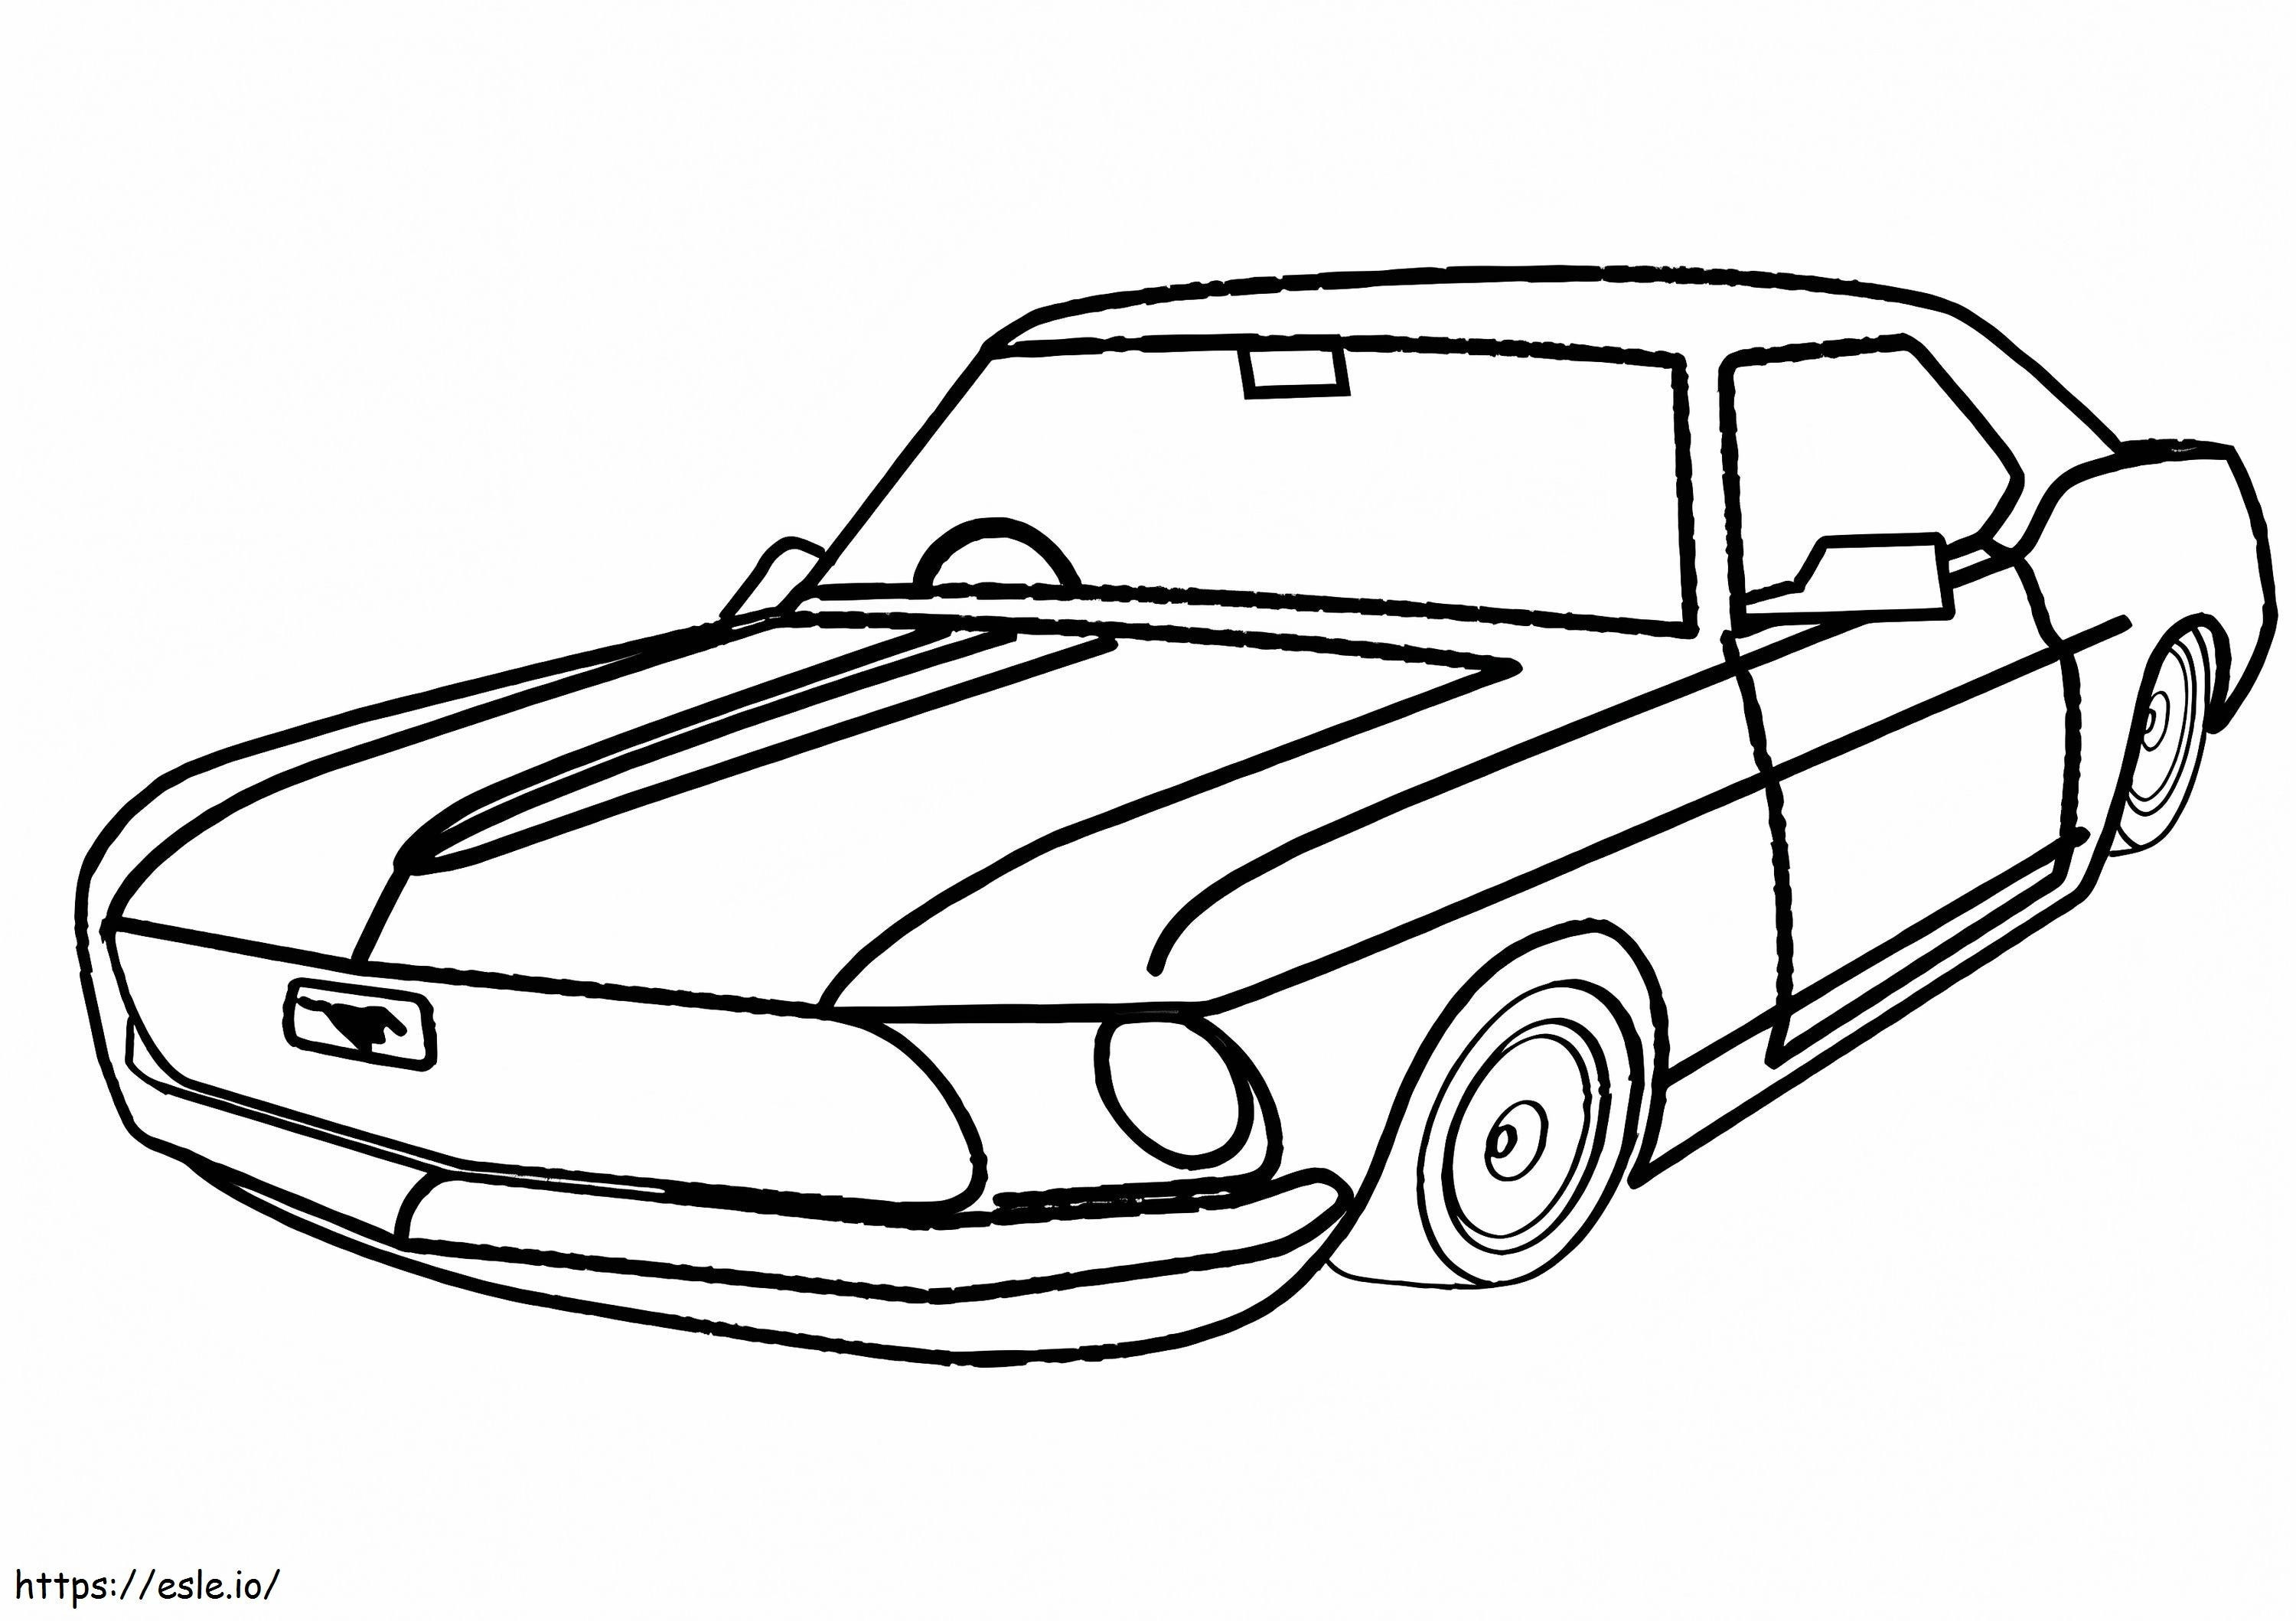 A Mustang coloring page